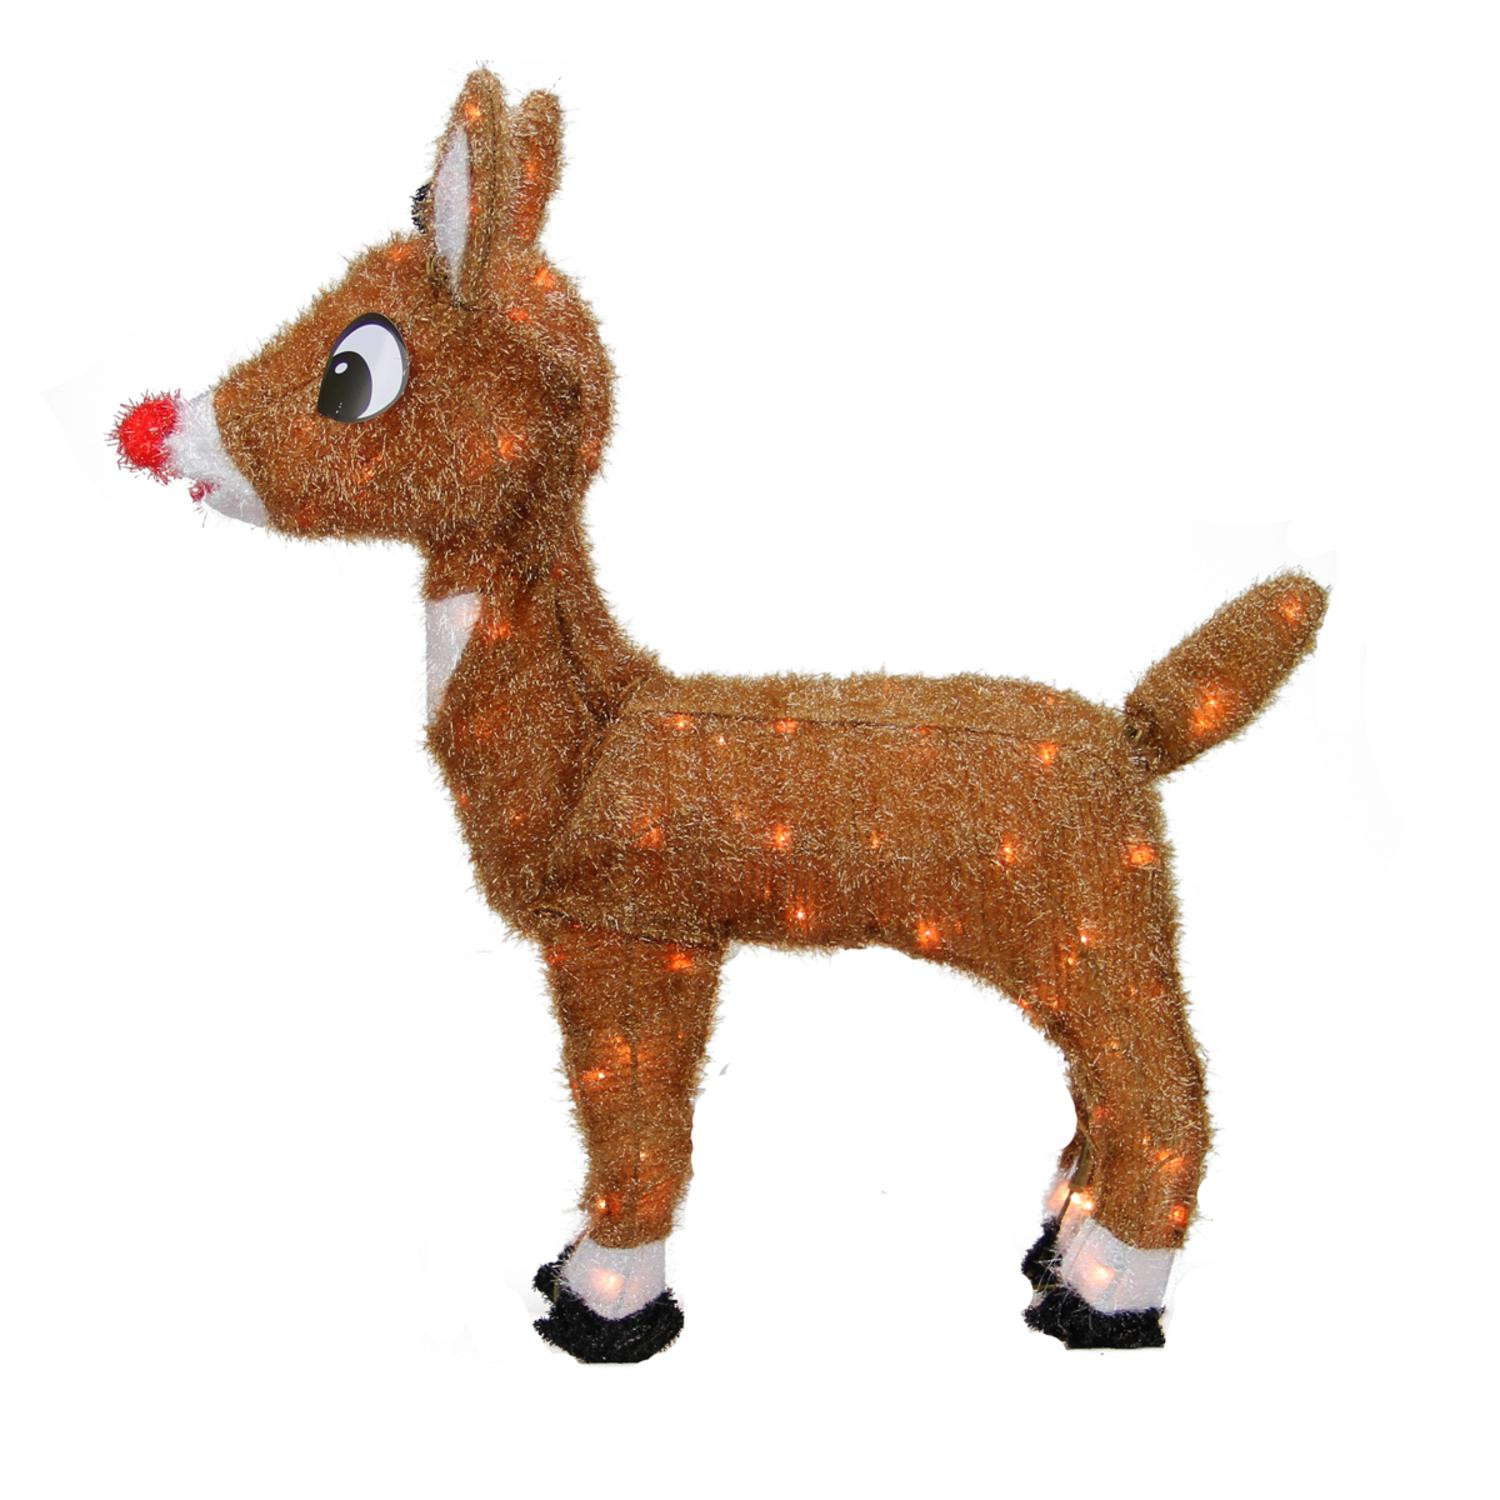 Rudolph Outdoor Christmas Decorations
 Product Works 26" Pre Lit Rudolph the Red Nosed Reindeer